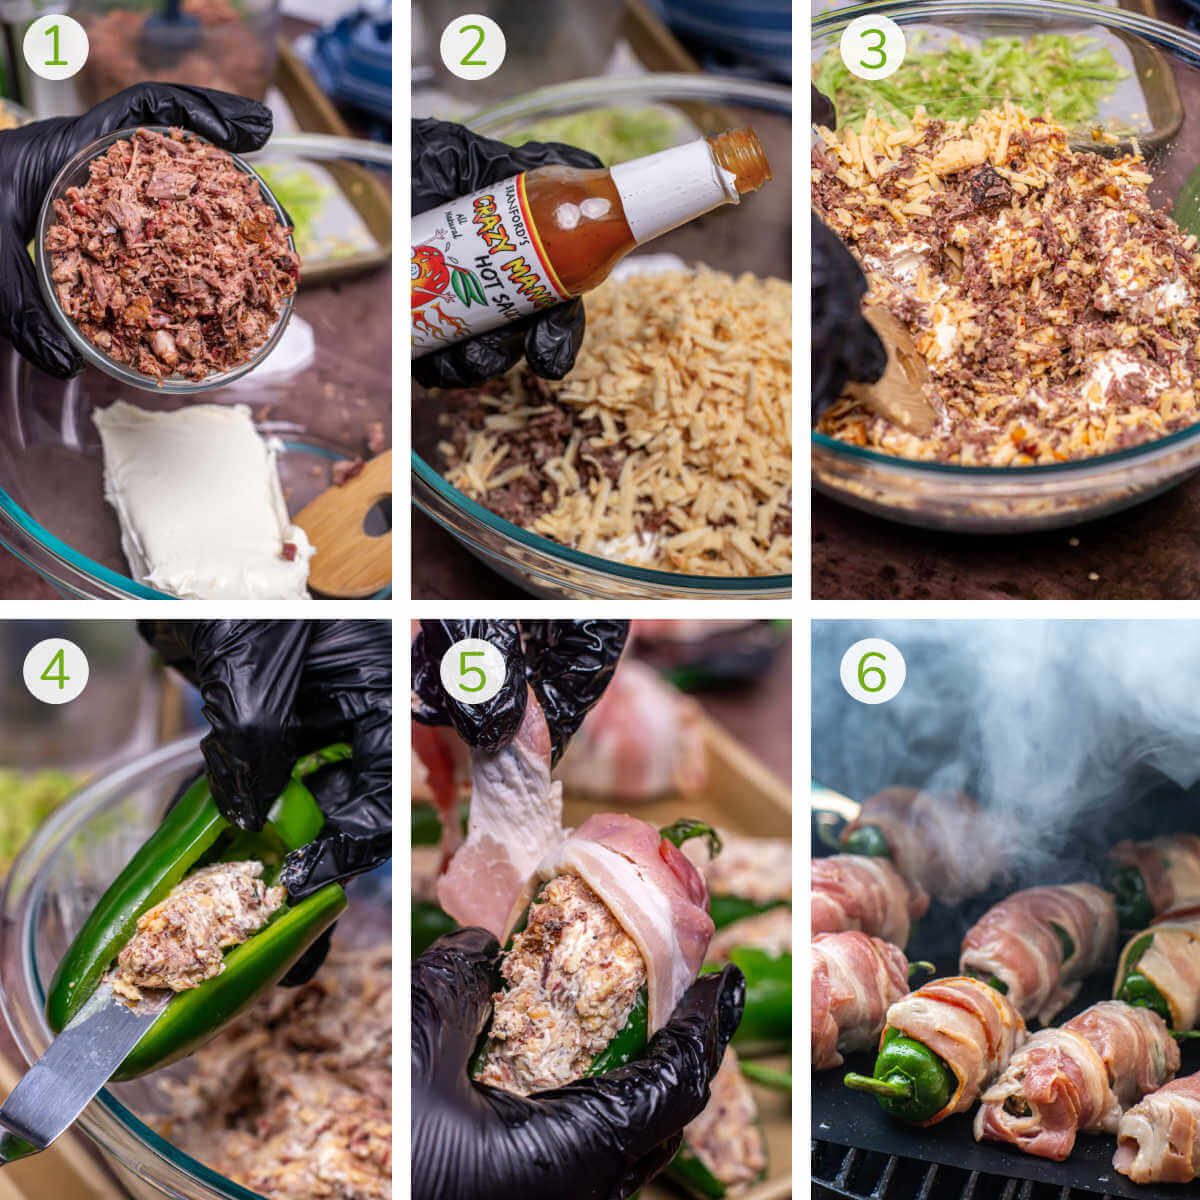 six process photos showing making the filling with brisket and hot sauce, stuffing the jalapeño, wrapping it in bacon and then smoking.